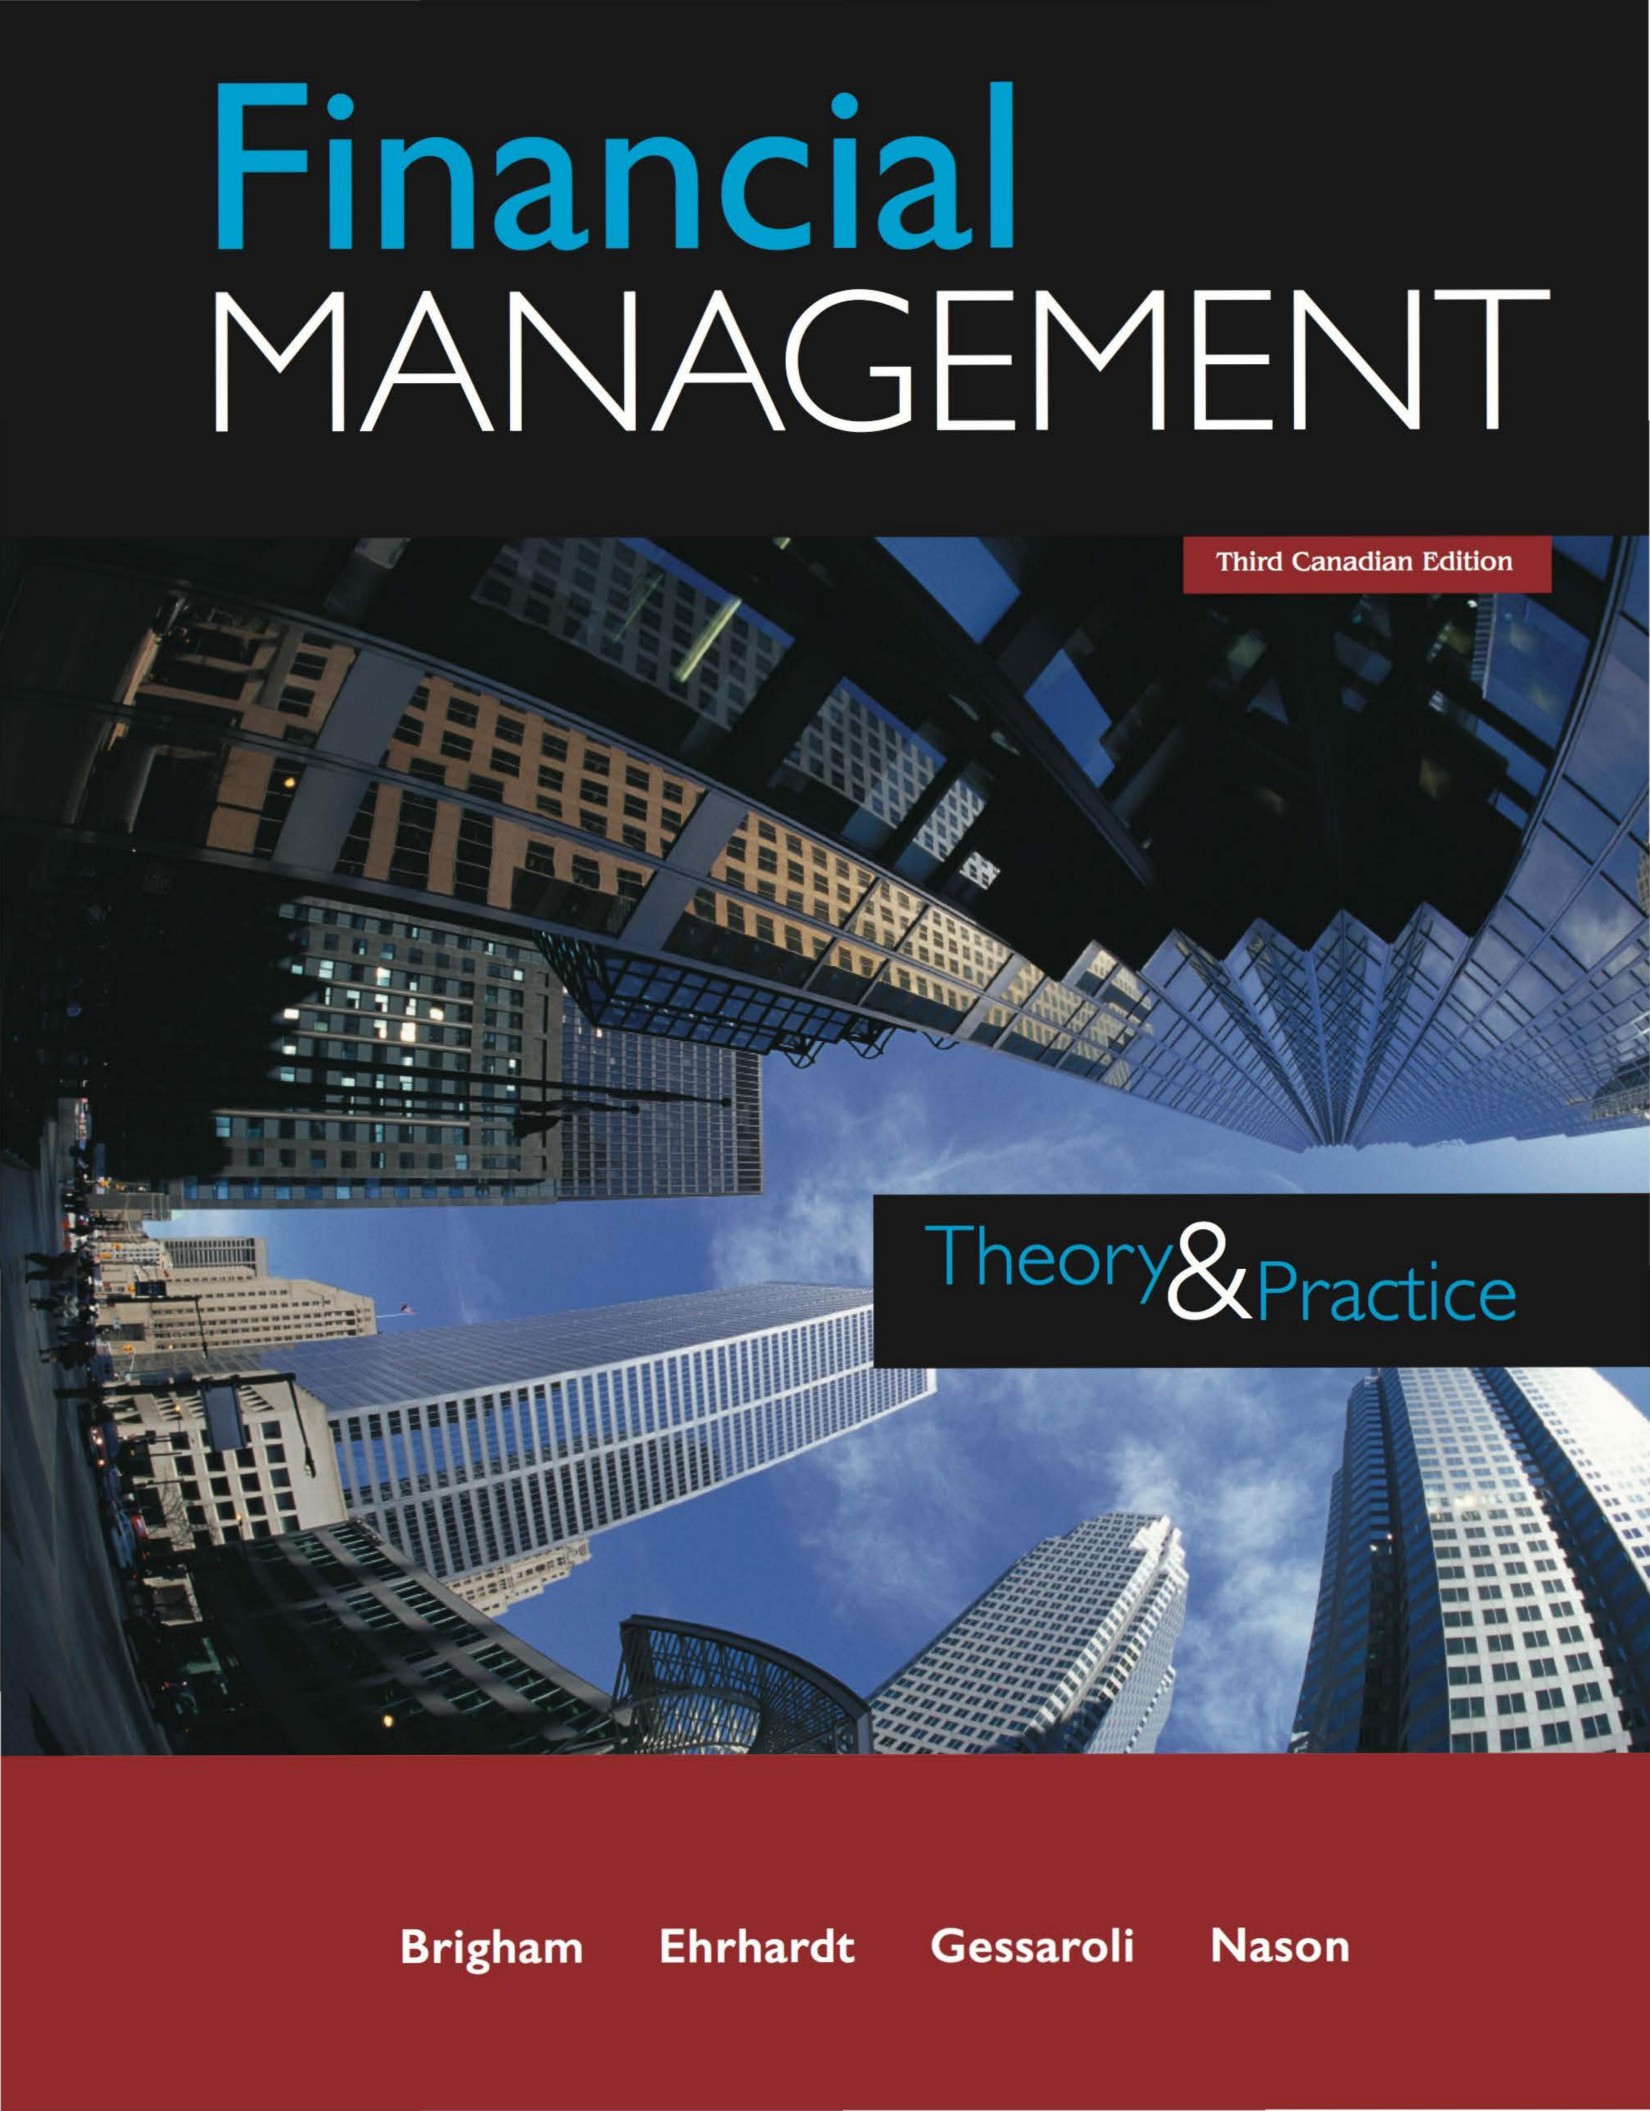 Financial Management Theory and Practice 3rd Canadian Edition by Eugene F. Brigham - Wei Zhi.jpg